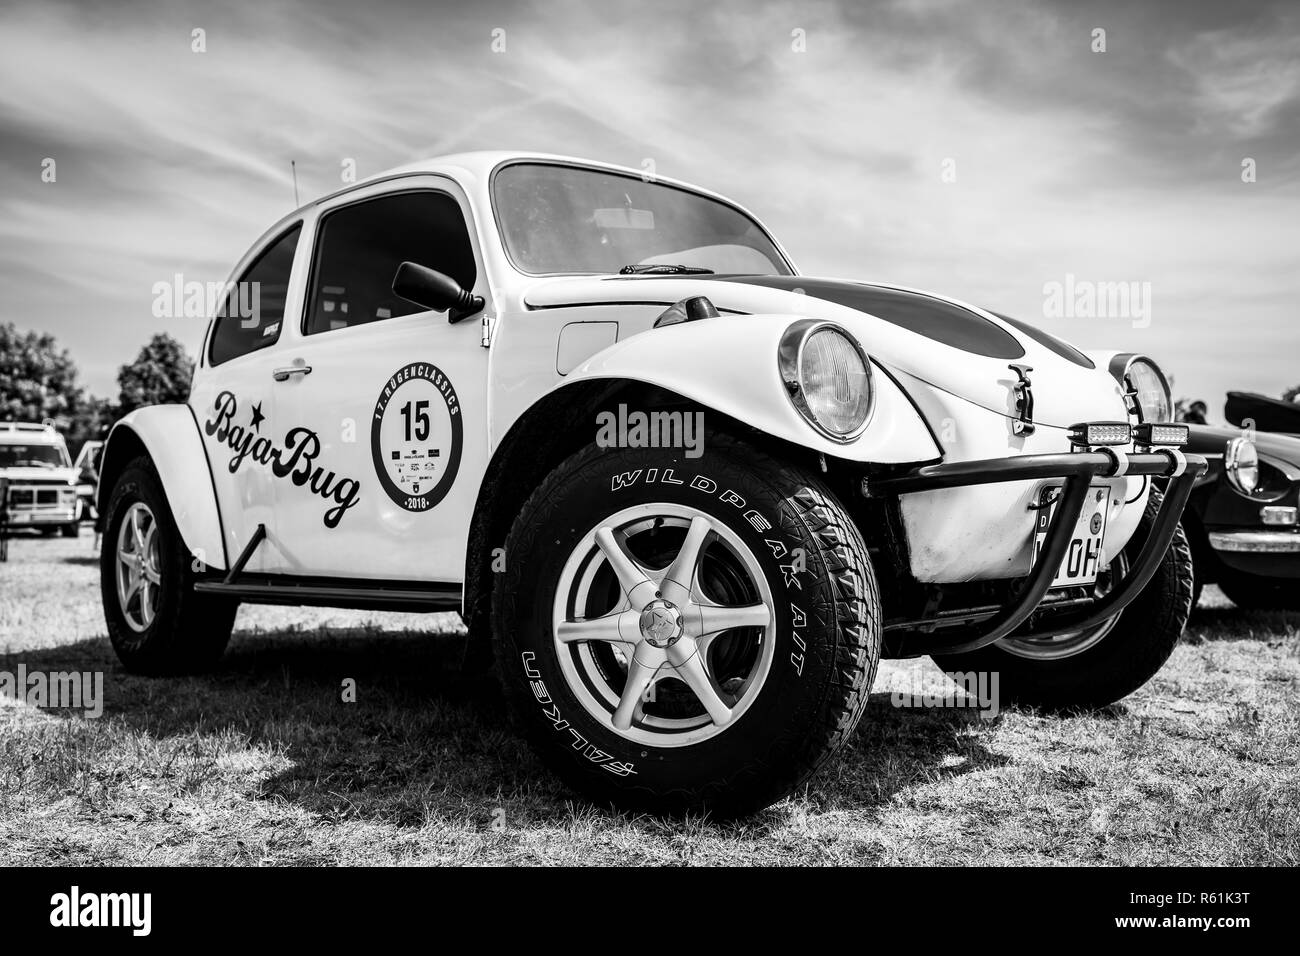 PAAREN IM GLIEN, GERMANY - MAY 19, 2018: A Baja Bug is an original Volkswagen Beetle modified to operate off-road. Black and white. Exhibition 'Die Ol Stock Photo